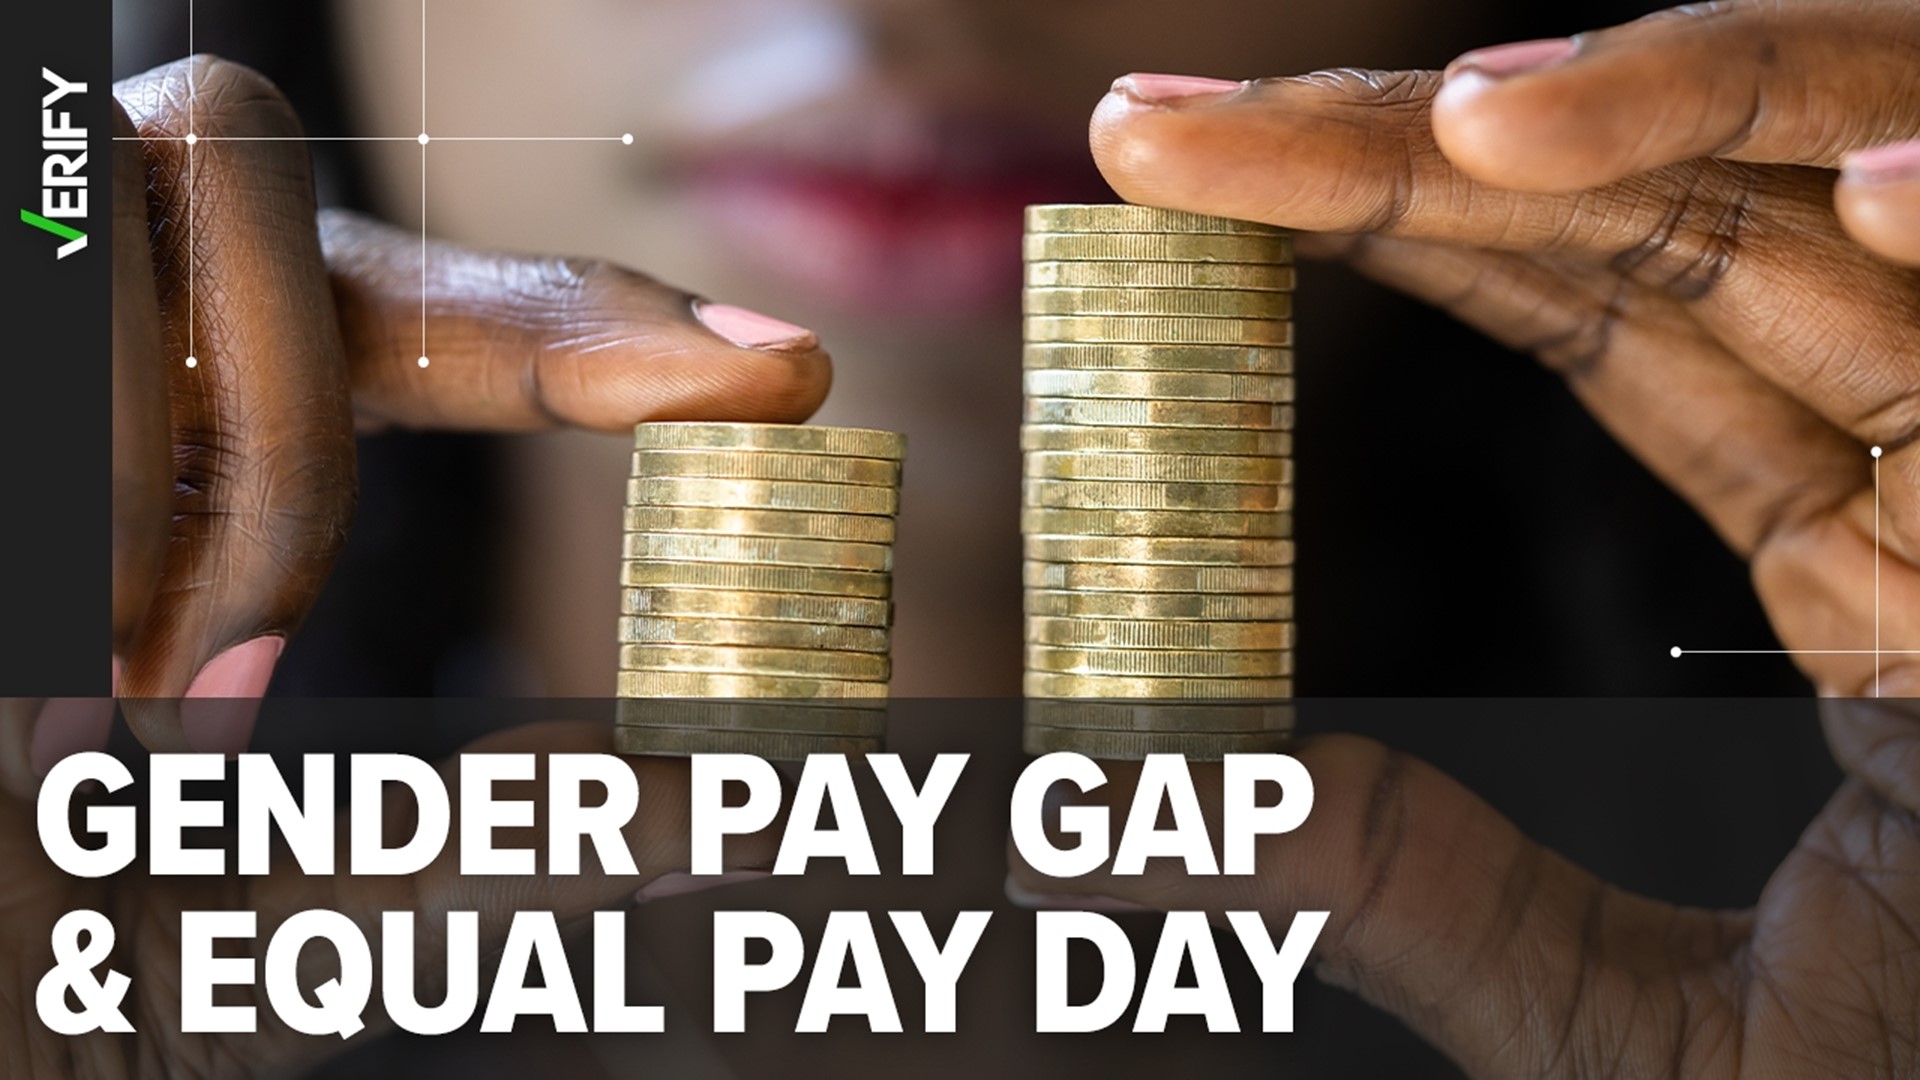 Equal Pay Day 2023 falls on March 14. That date symbolizes how far into a new year a woman must work to earn what a man did in the previous year.